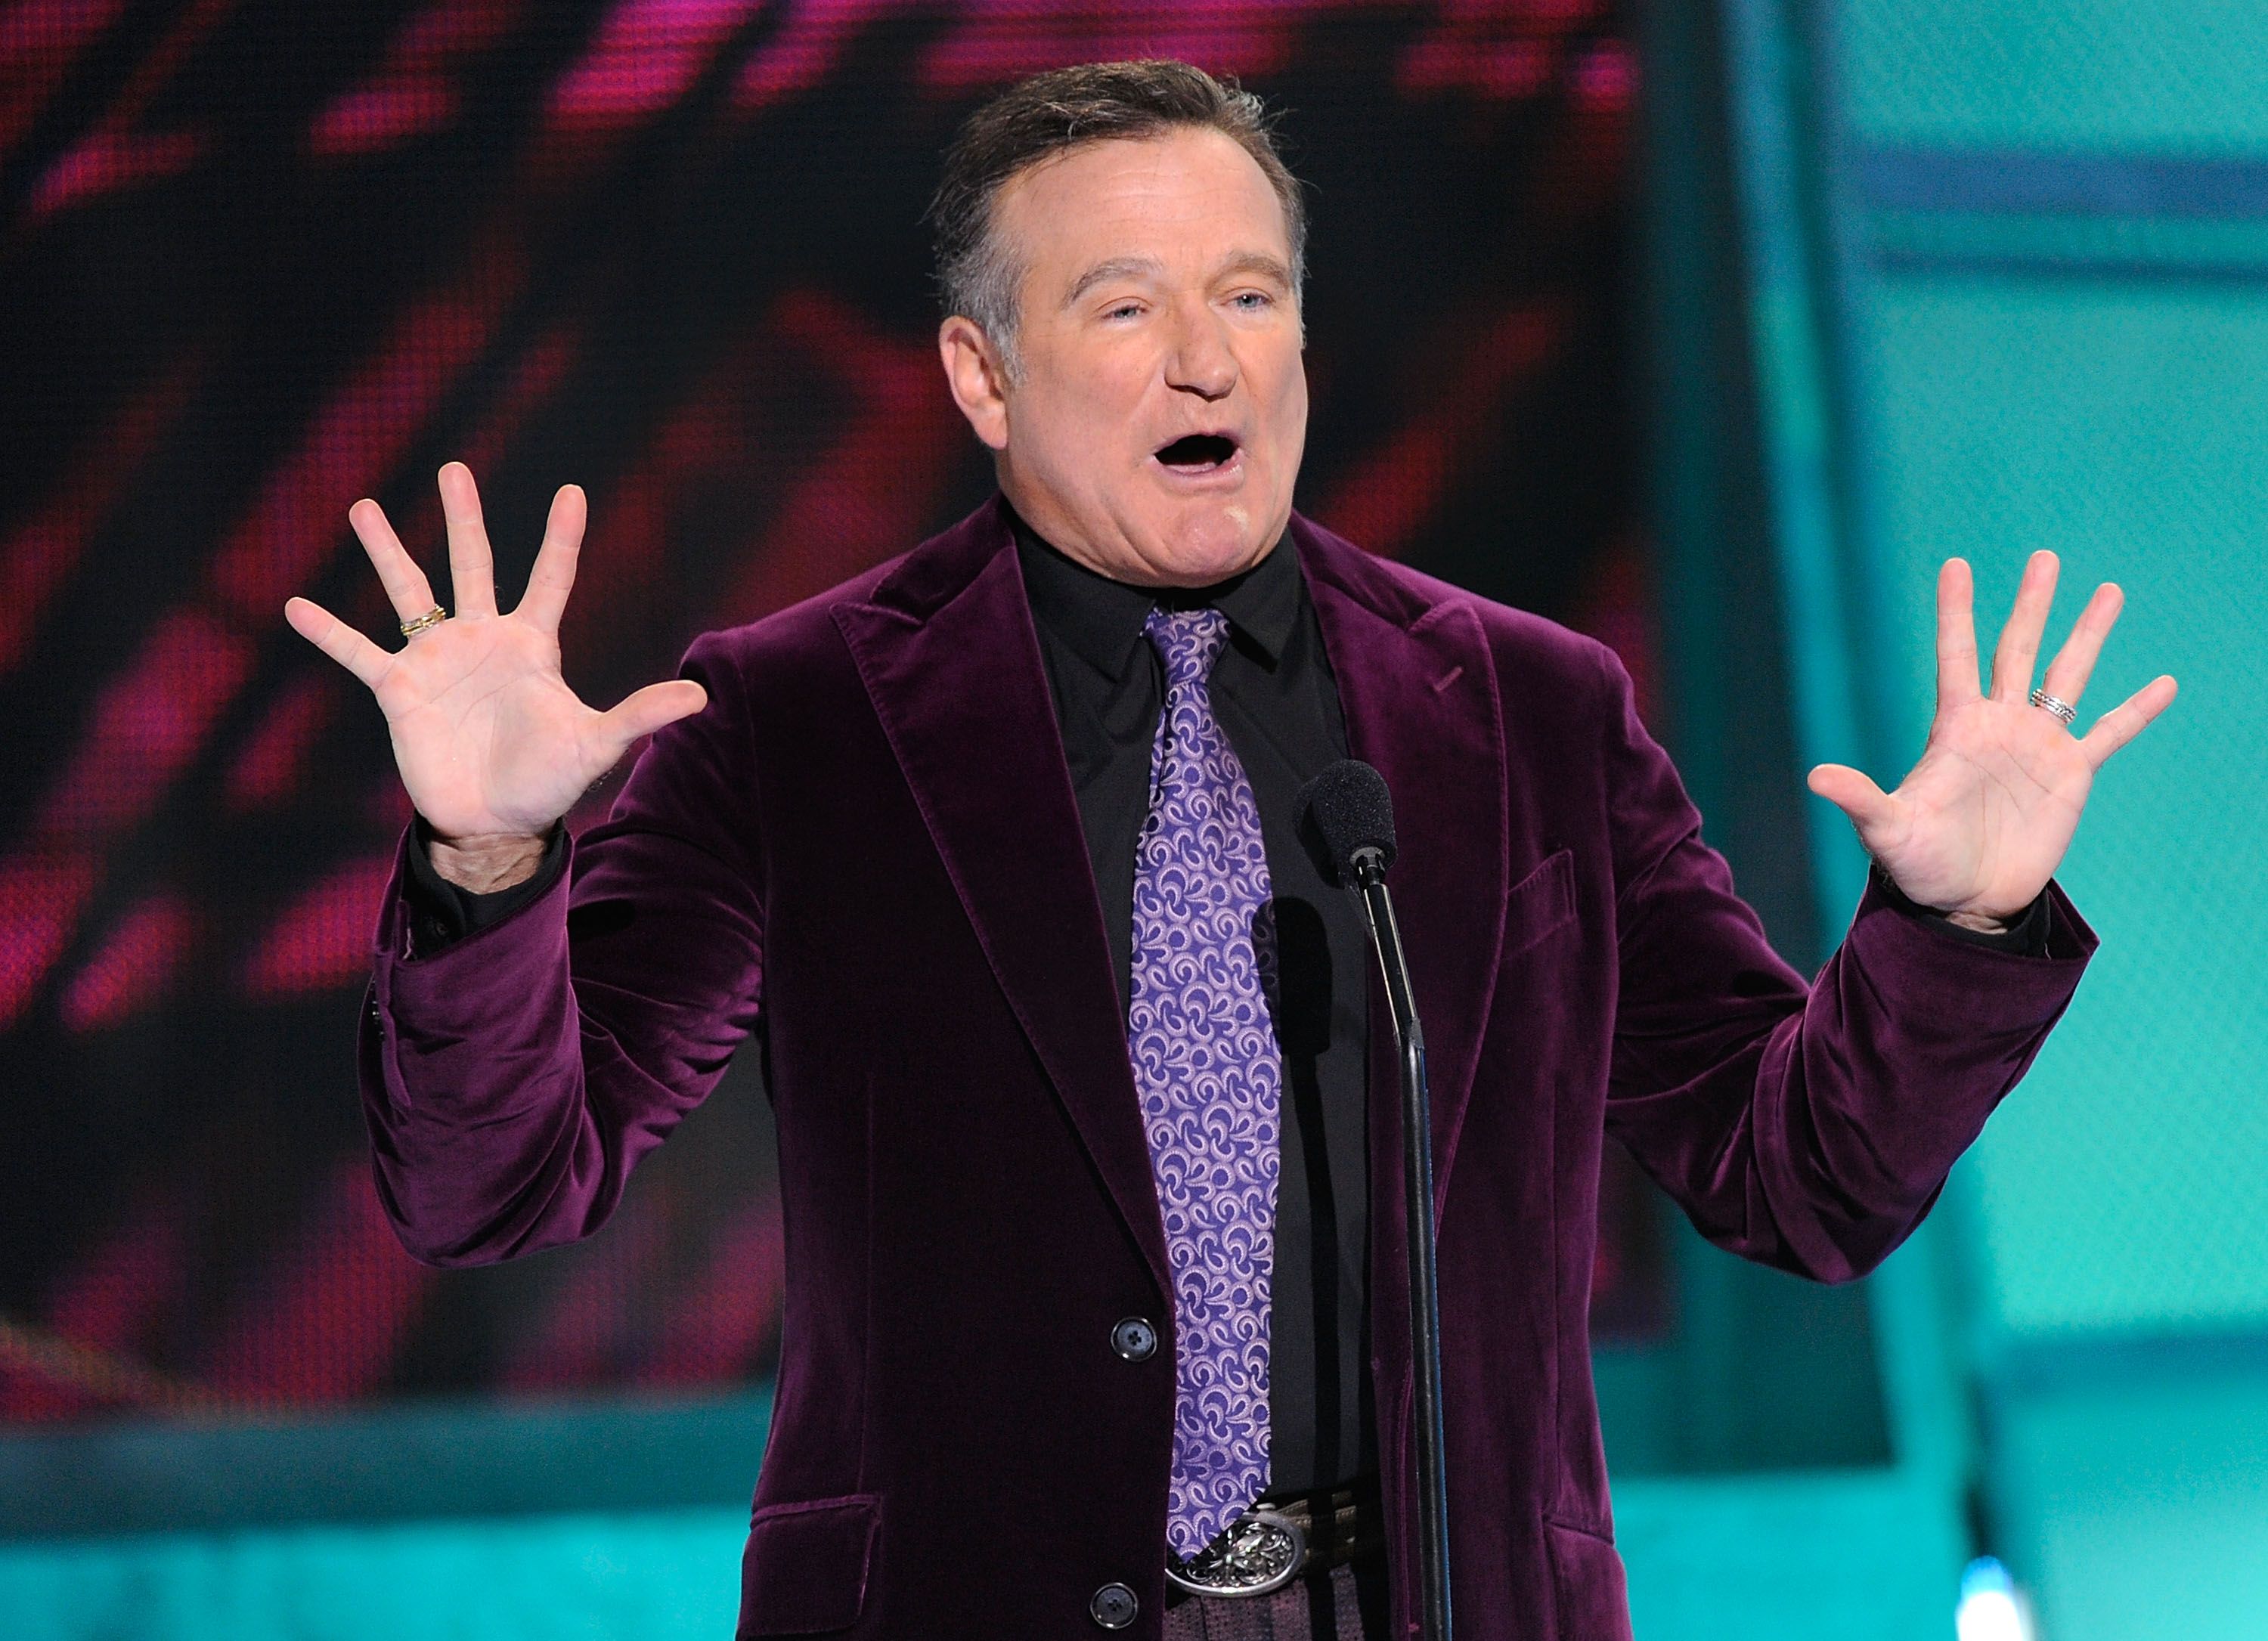 Late Robin Williams spoke at the 35th Annual People's Choice Awards held at the Shrine Auditorium on January 7, 2009 | Photo: Getty Images